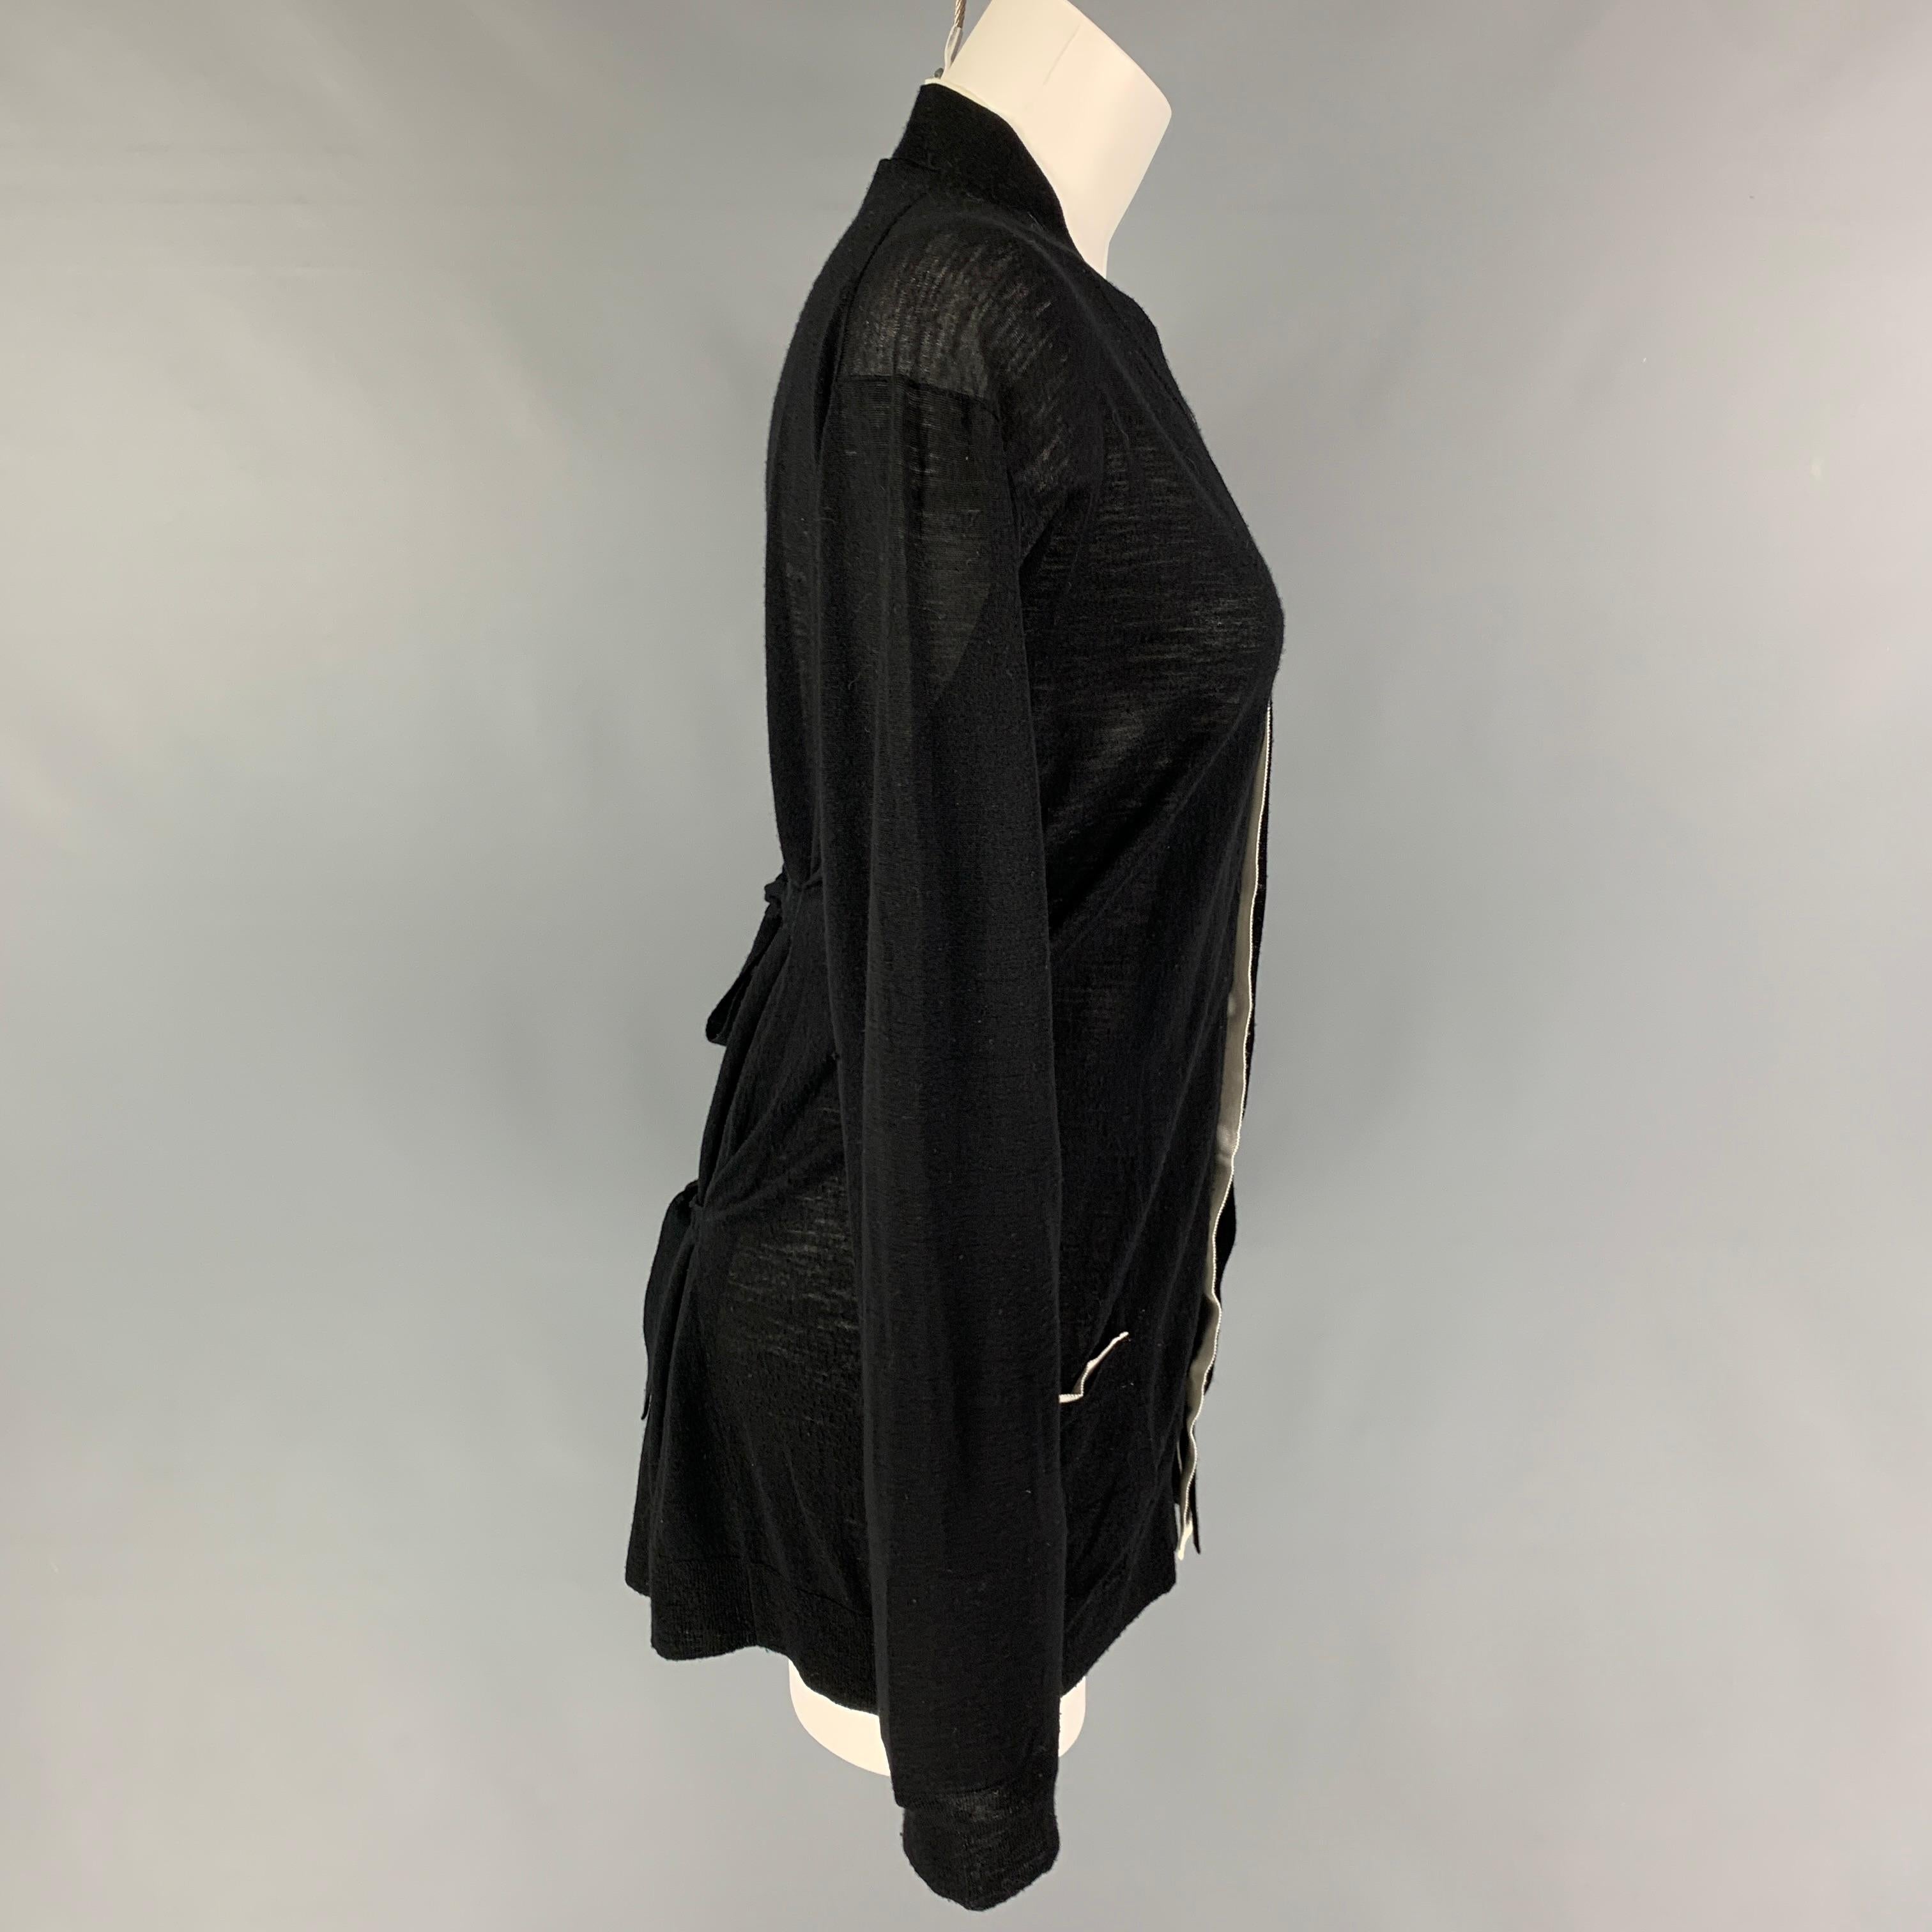 ANN DEMEULEMEESTER cardigan comes in a black wool with a white contrast trim featuring back self-toe details, front pockets, back slit, and a buttoned closure. Made in Belgium. 

Very Good Pre-Owned Condition.
Marked: 40

Measurements:

Shoulder: 17